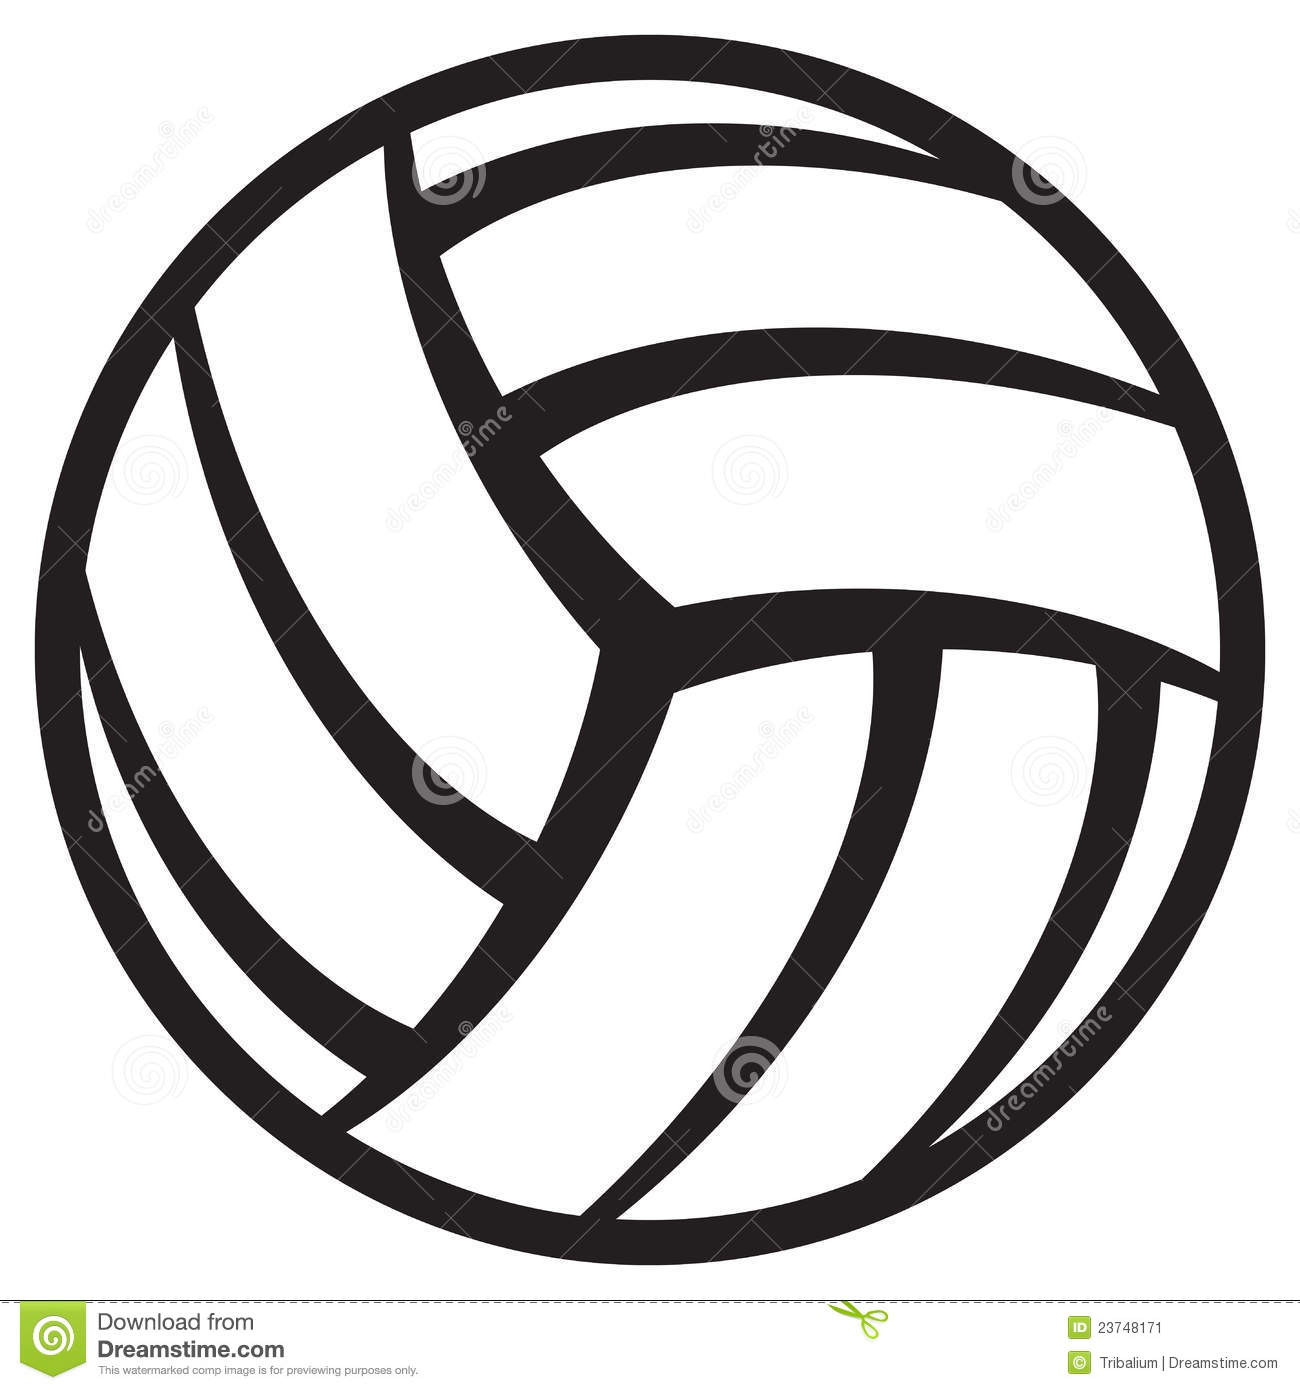 Volleyball clipart clipart cl - Volleyball Clipart Images